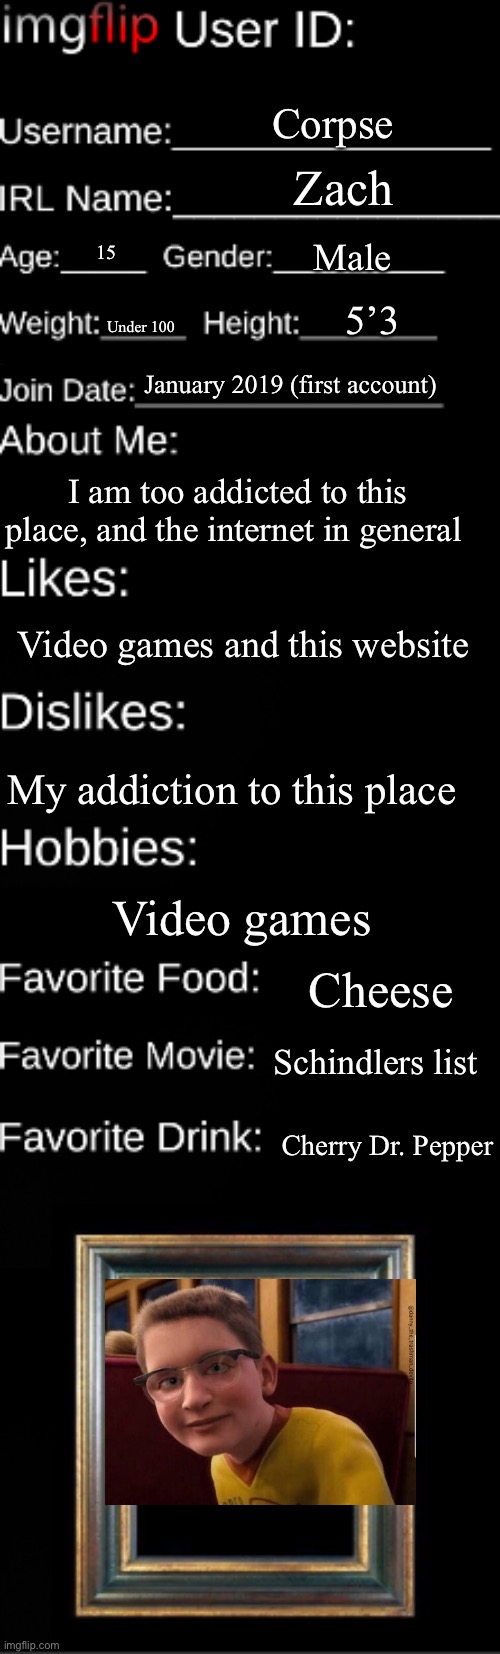 Imgflip user ID | Corpse; Zach; Male; 15; 5’3; Under 100; January 2019 (first account); I am too addicted to this place, and the internet in general; Video games and this website; My addiction to this place; Video games; Cheese; Schindlers list; Cherry Dr. Pepper | image tagged in imgflip user id | made w/ Imgflip meme maker